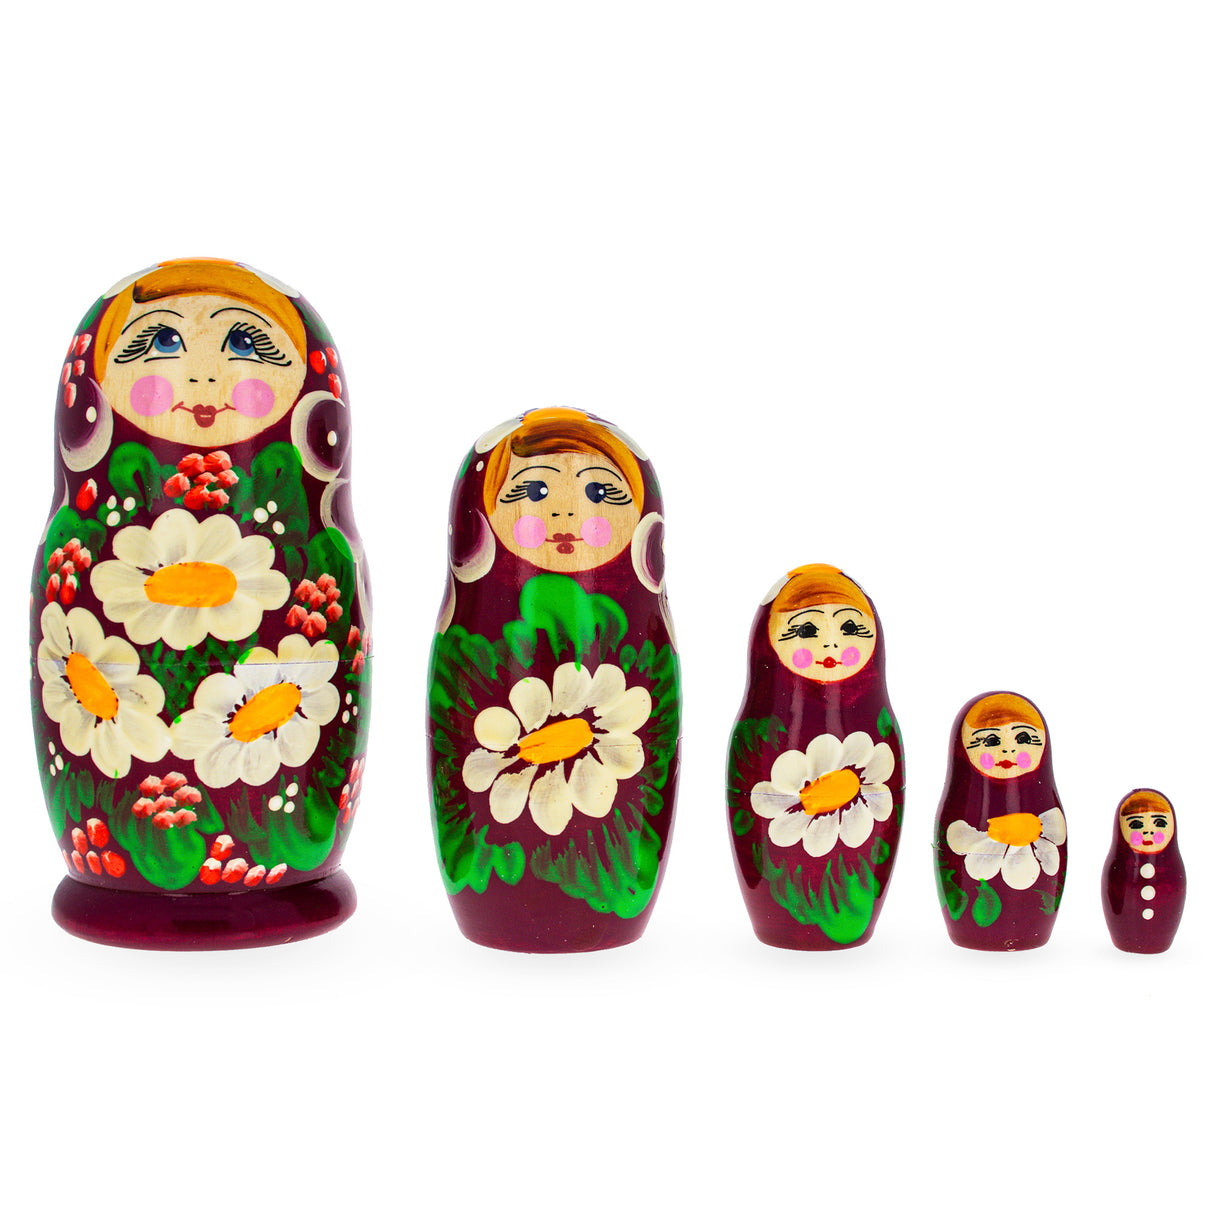 Wood Beautiful Wooden  with Red Color Hood and Flowers Nesting Dolls in Red color